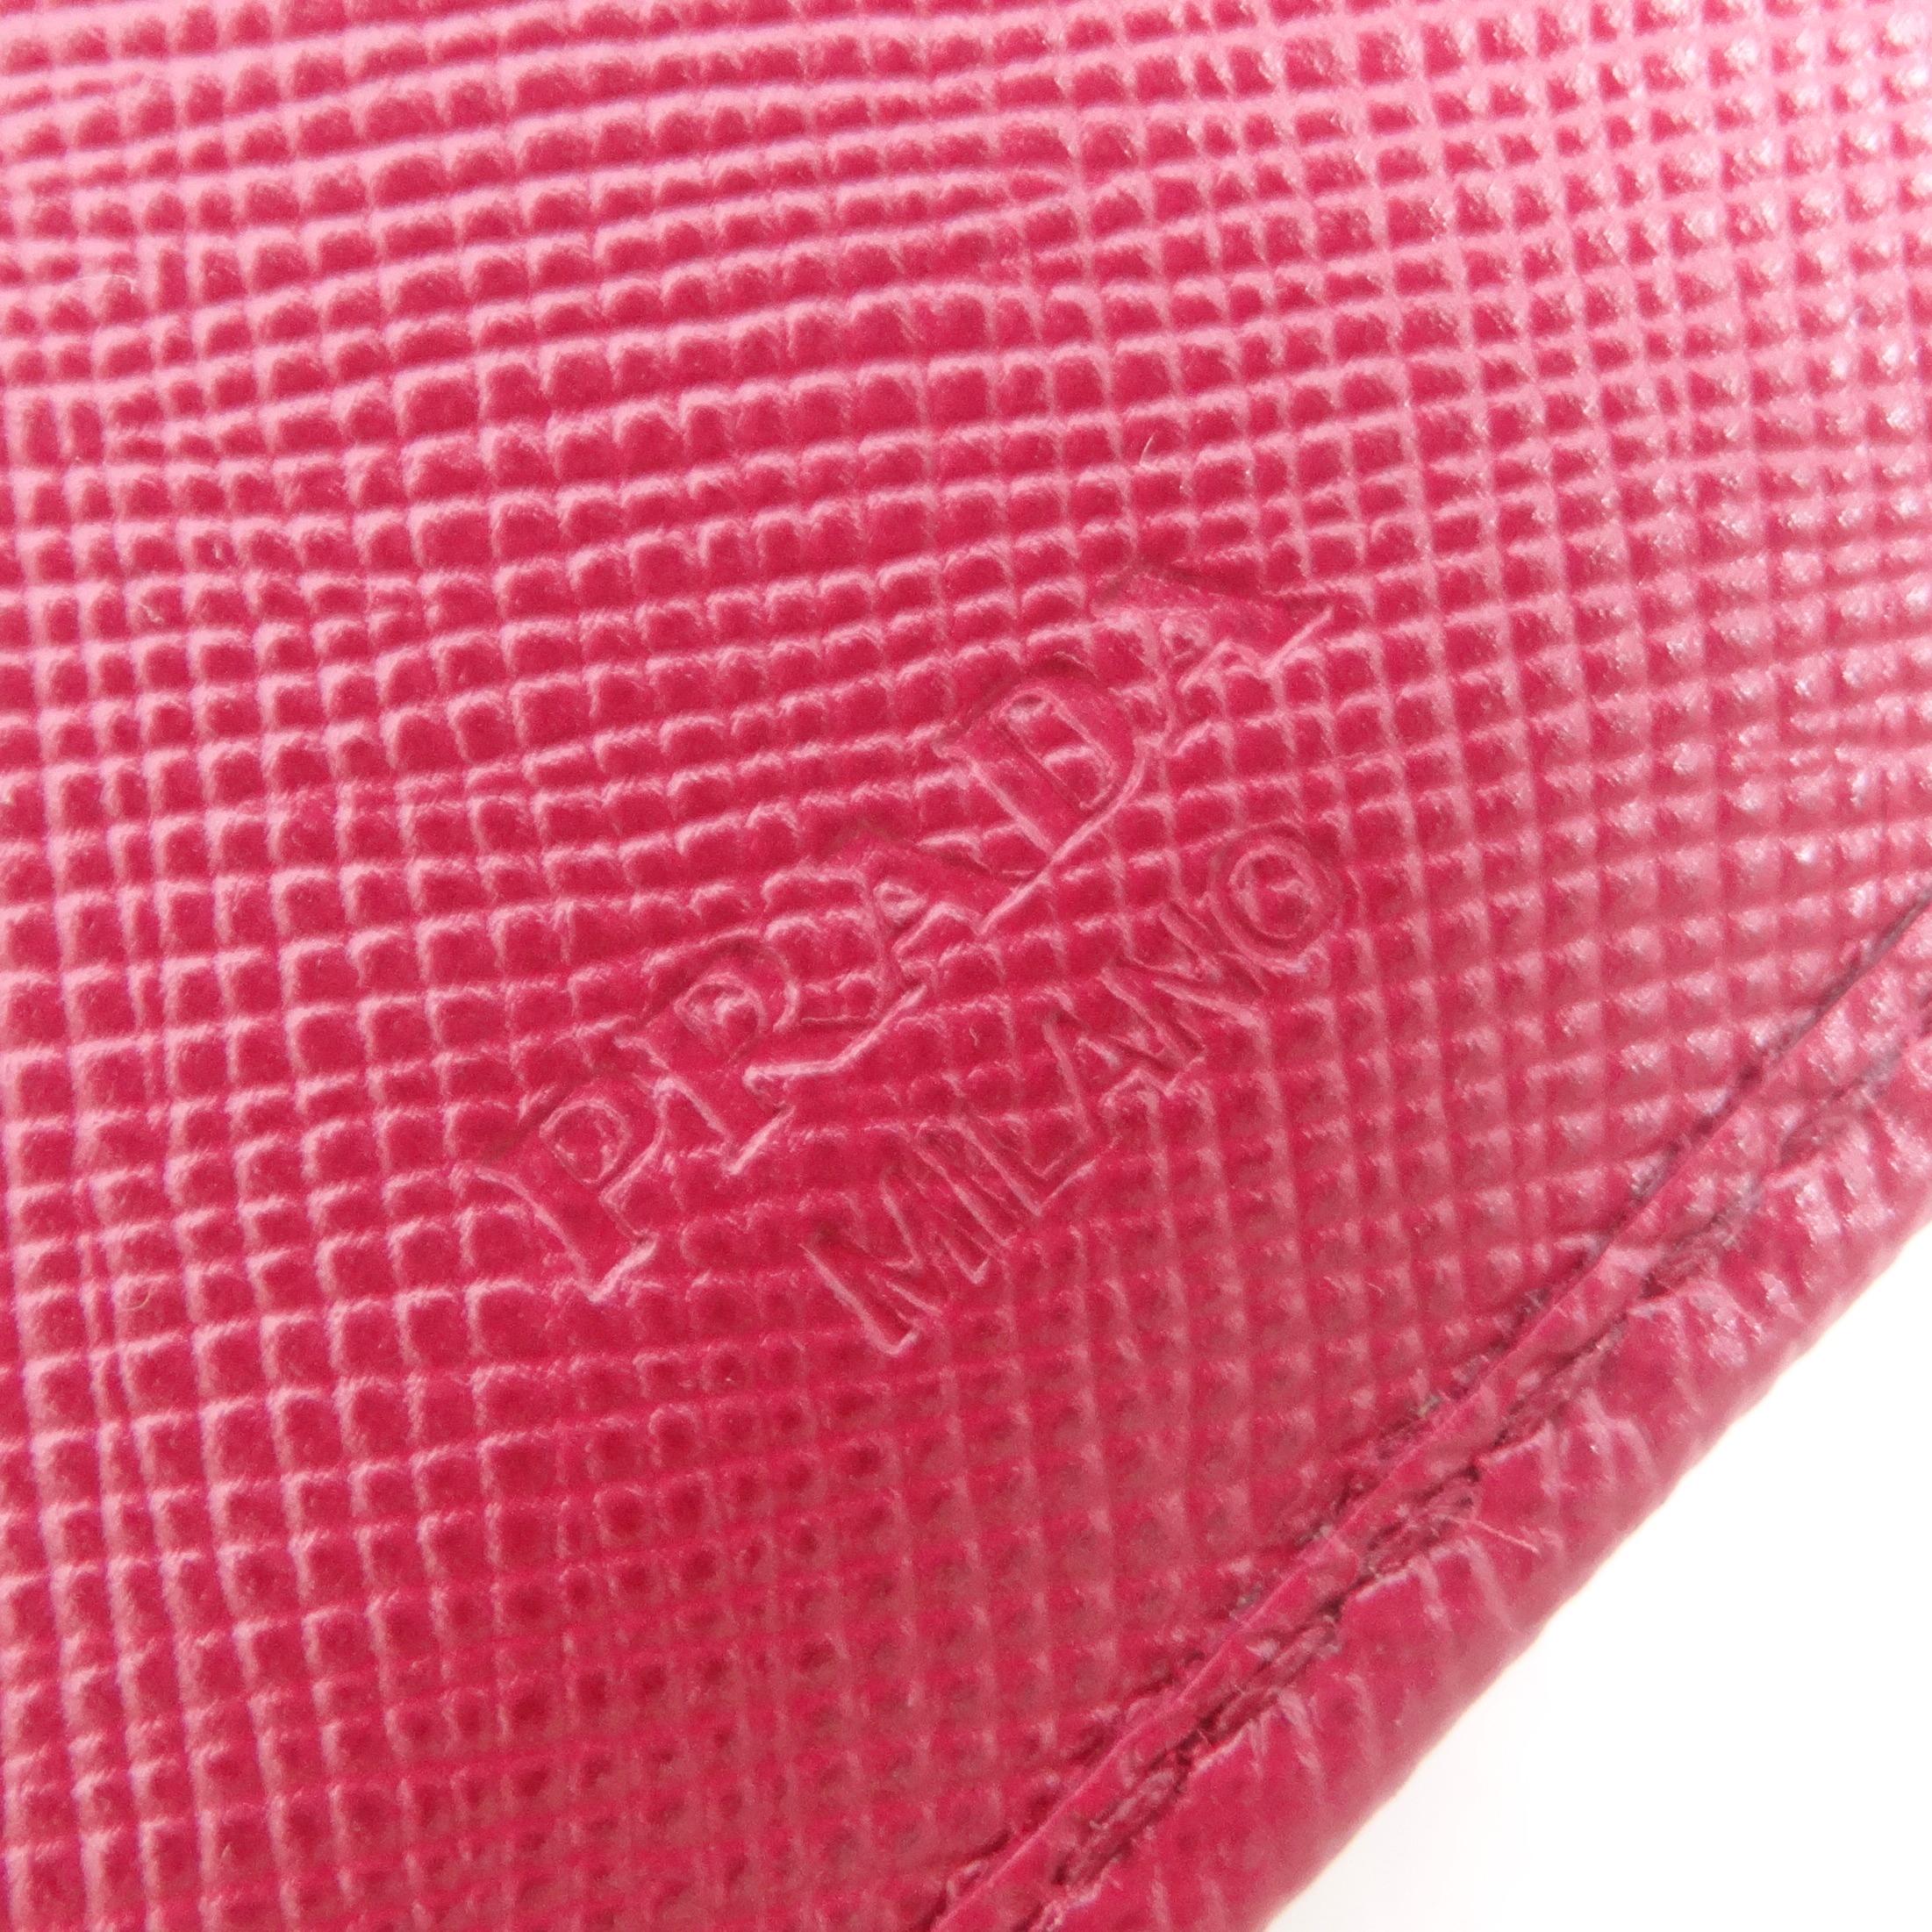 Prada Saffiano Leather Compact Wallet Pink For Sale 5